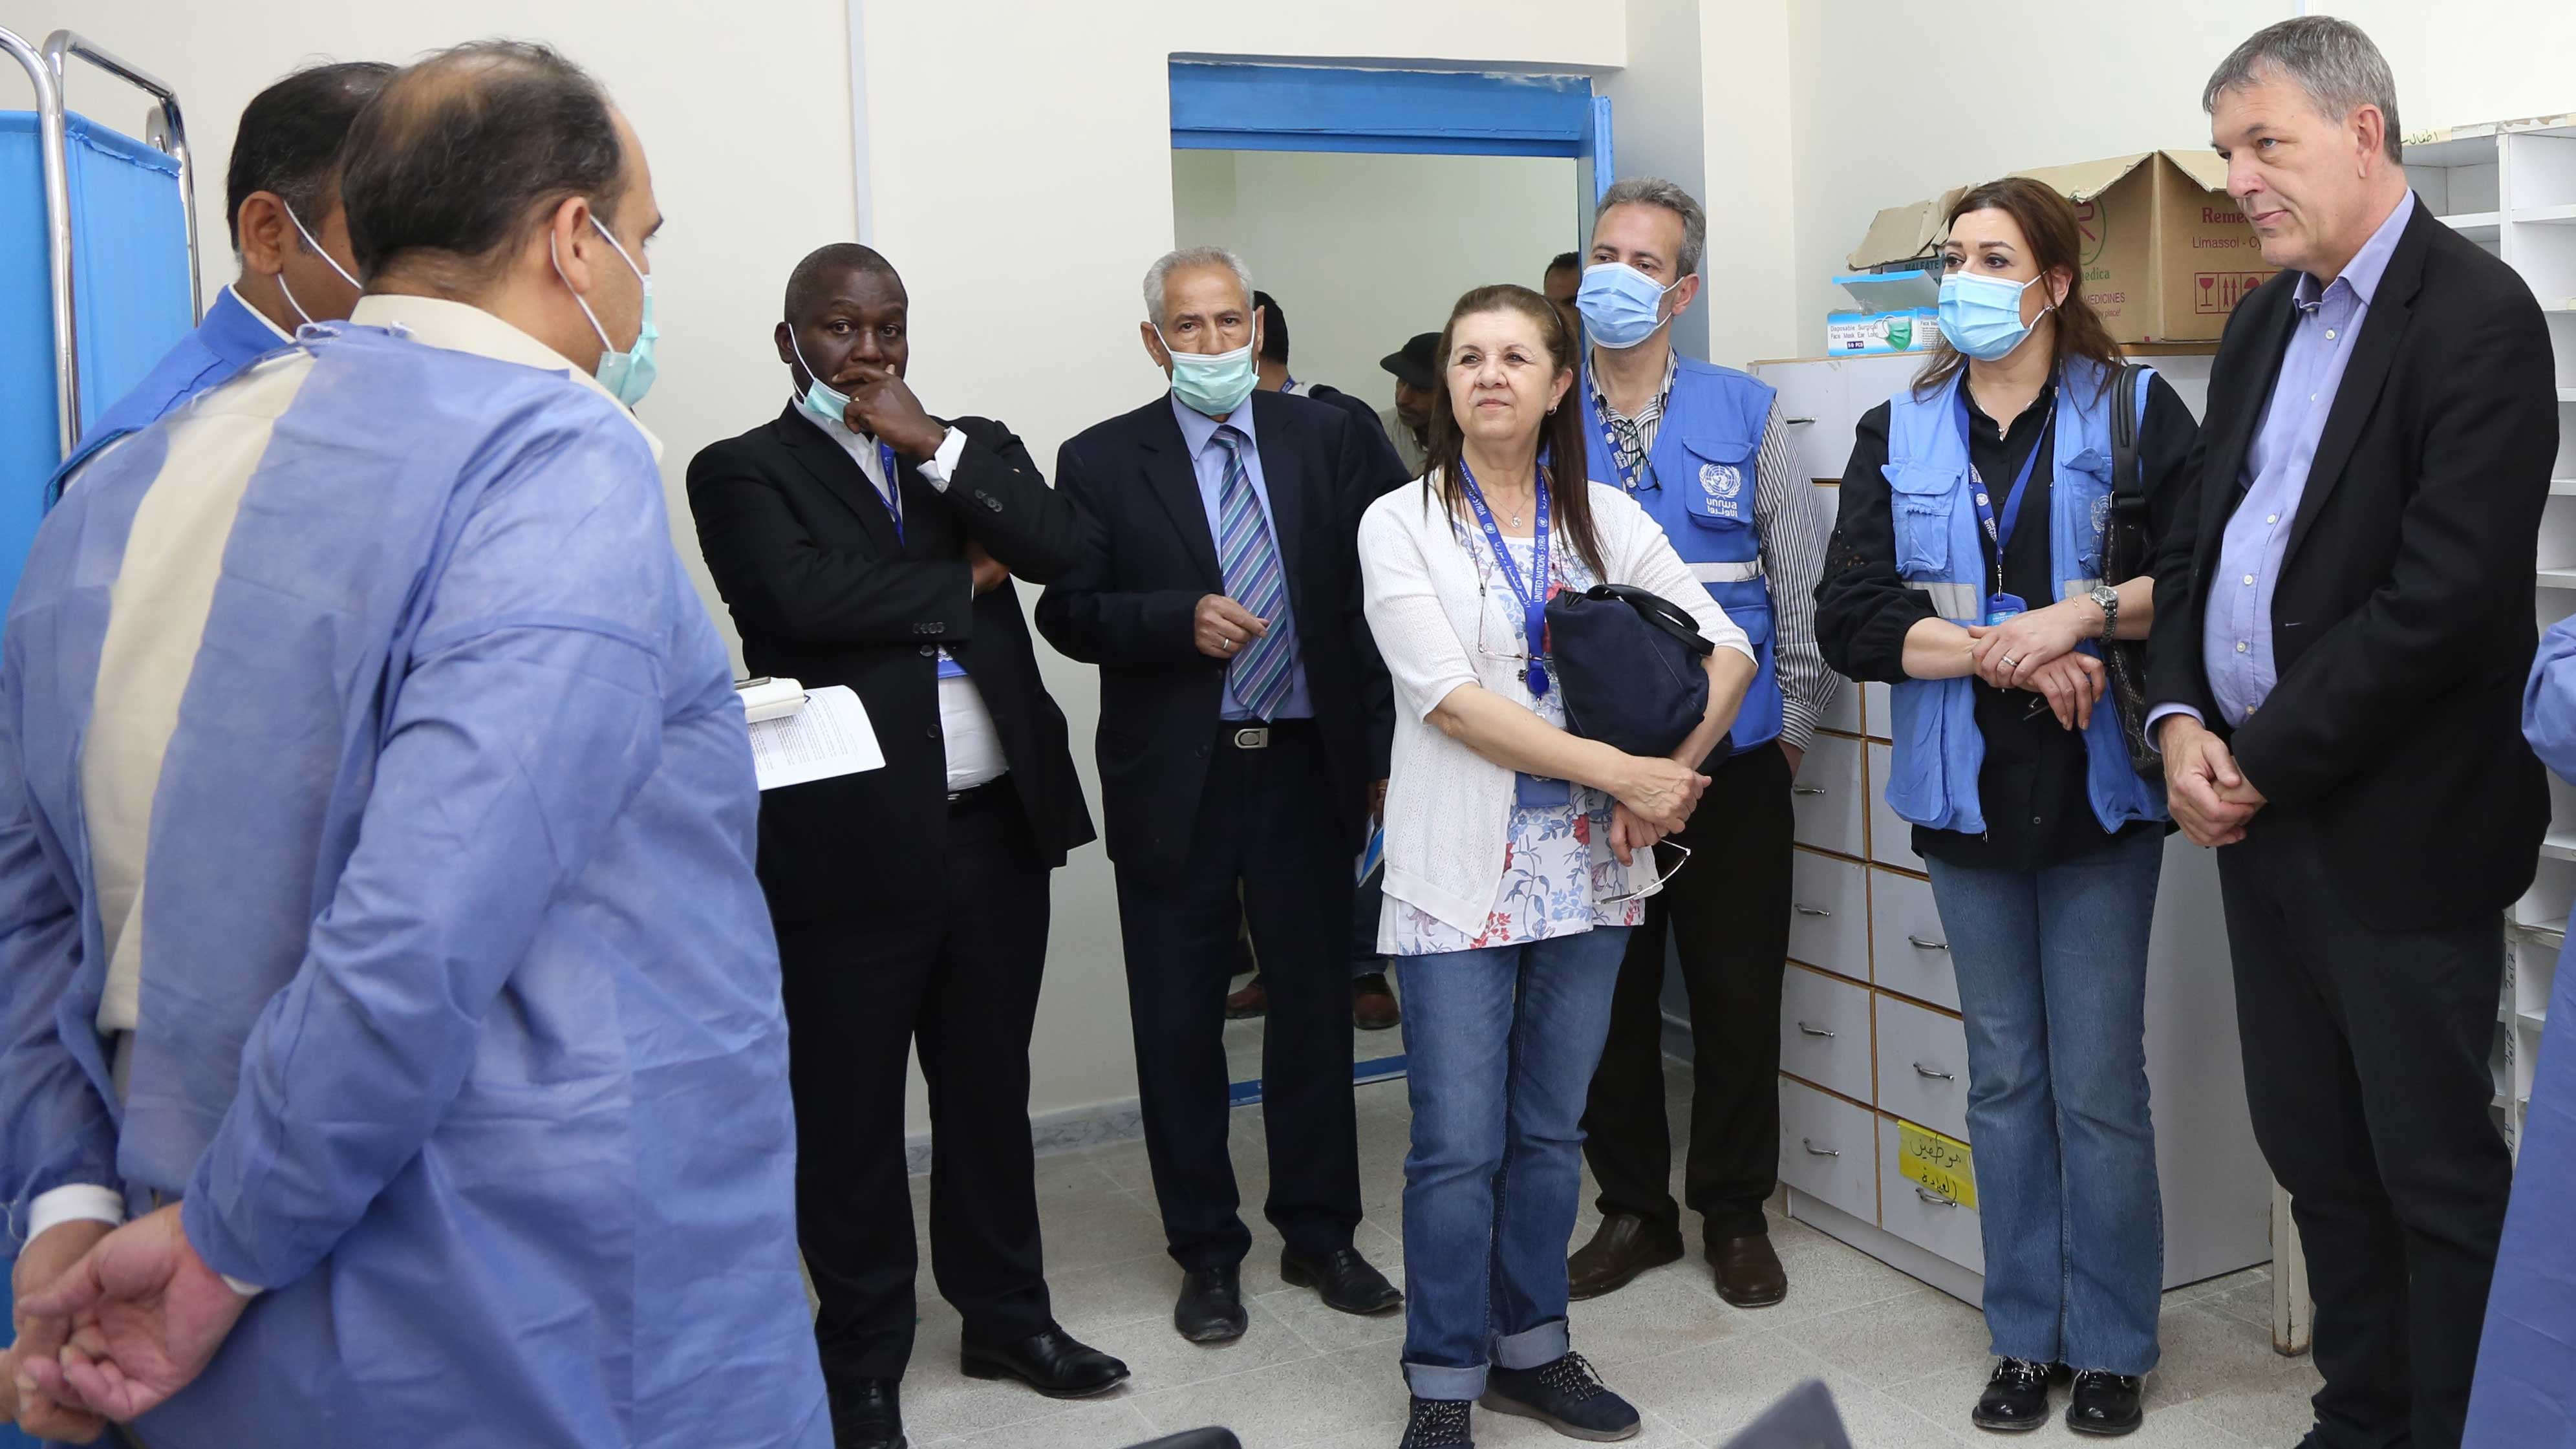 Lazzarini stands inside a hospital room is in discussion with medical service professionals and staff